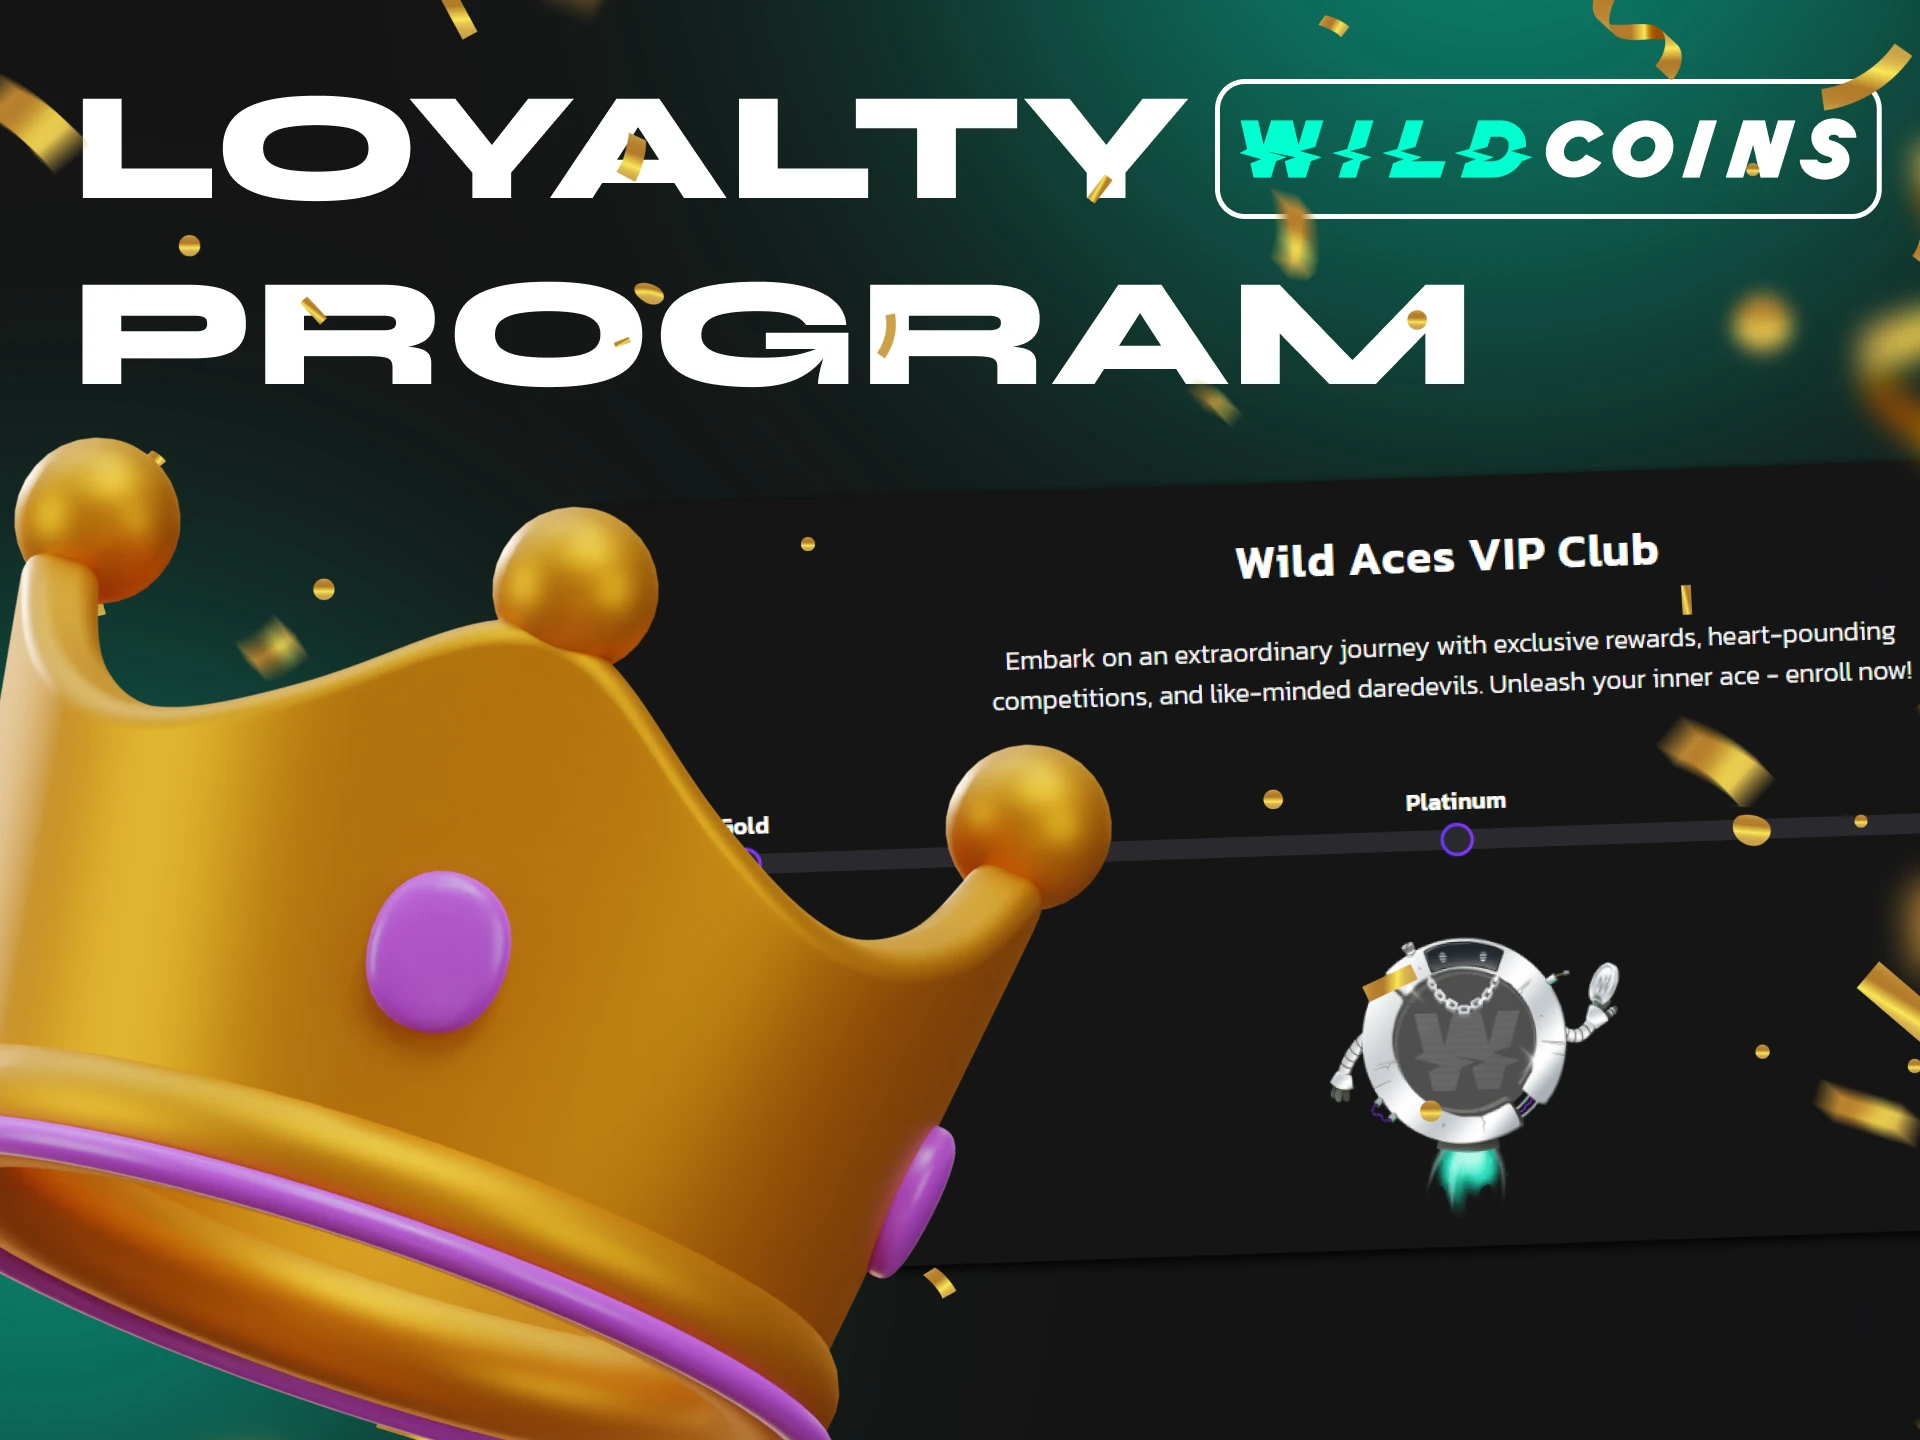 Join the Wildcoins casino loyalty program and receive nice bonuses.